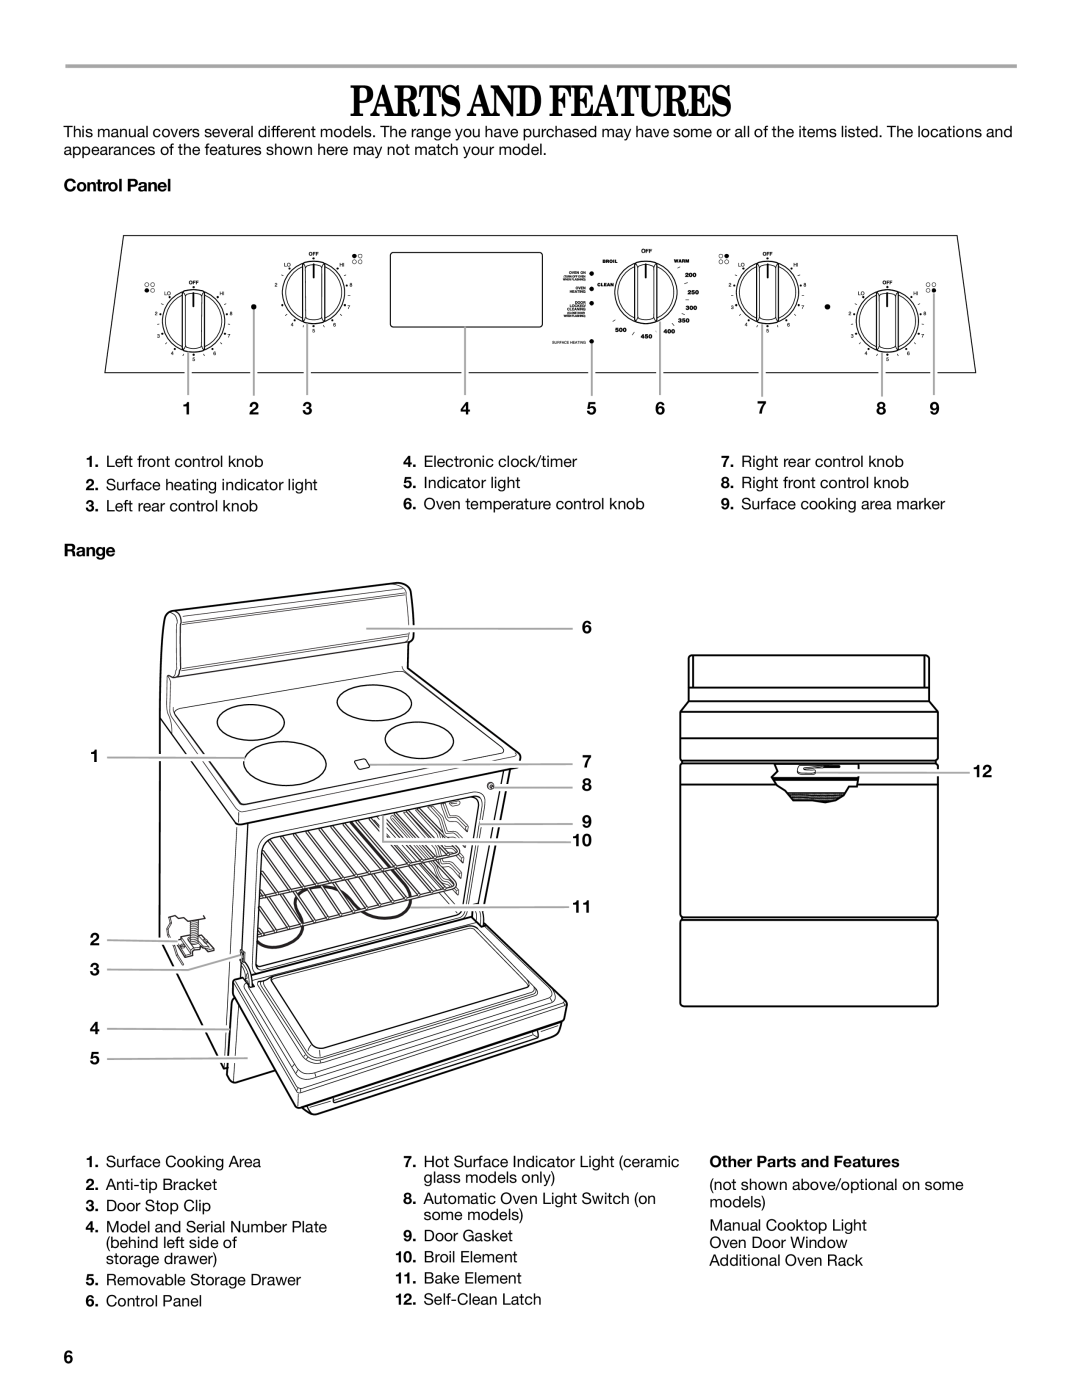 Whirlpool RF364BXG, RF366PXG, RF365PXG, RF362BXG, RF340BXH, RF341BXH manual Parts And Features, Control Panel, Range 